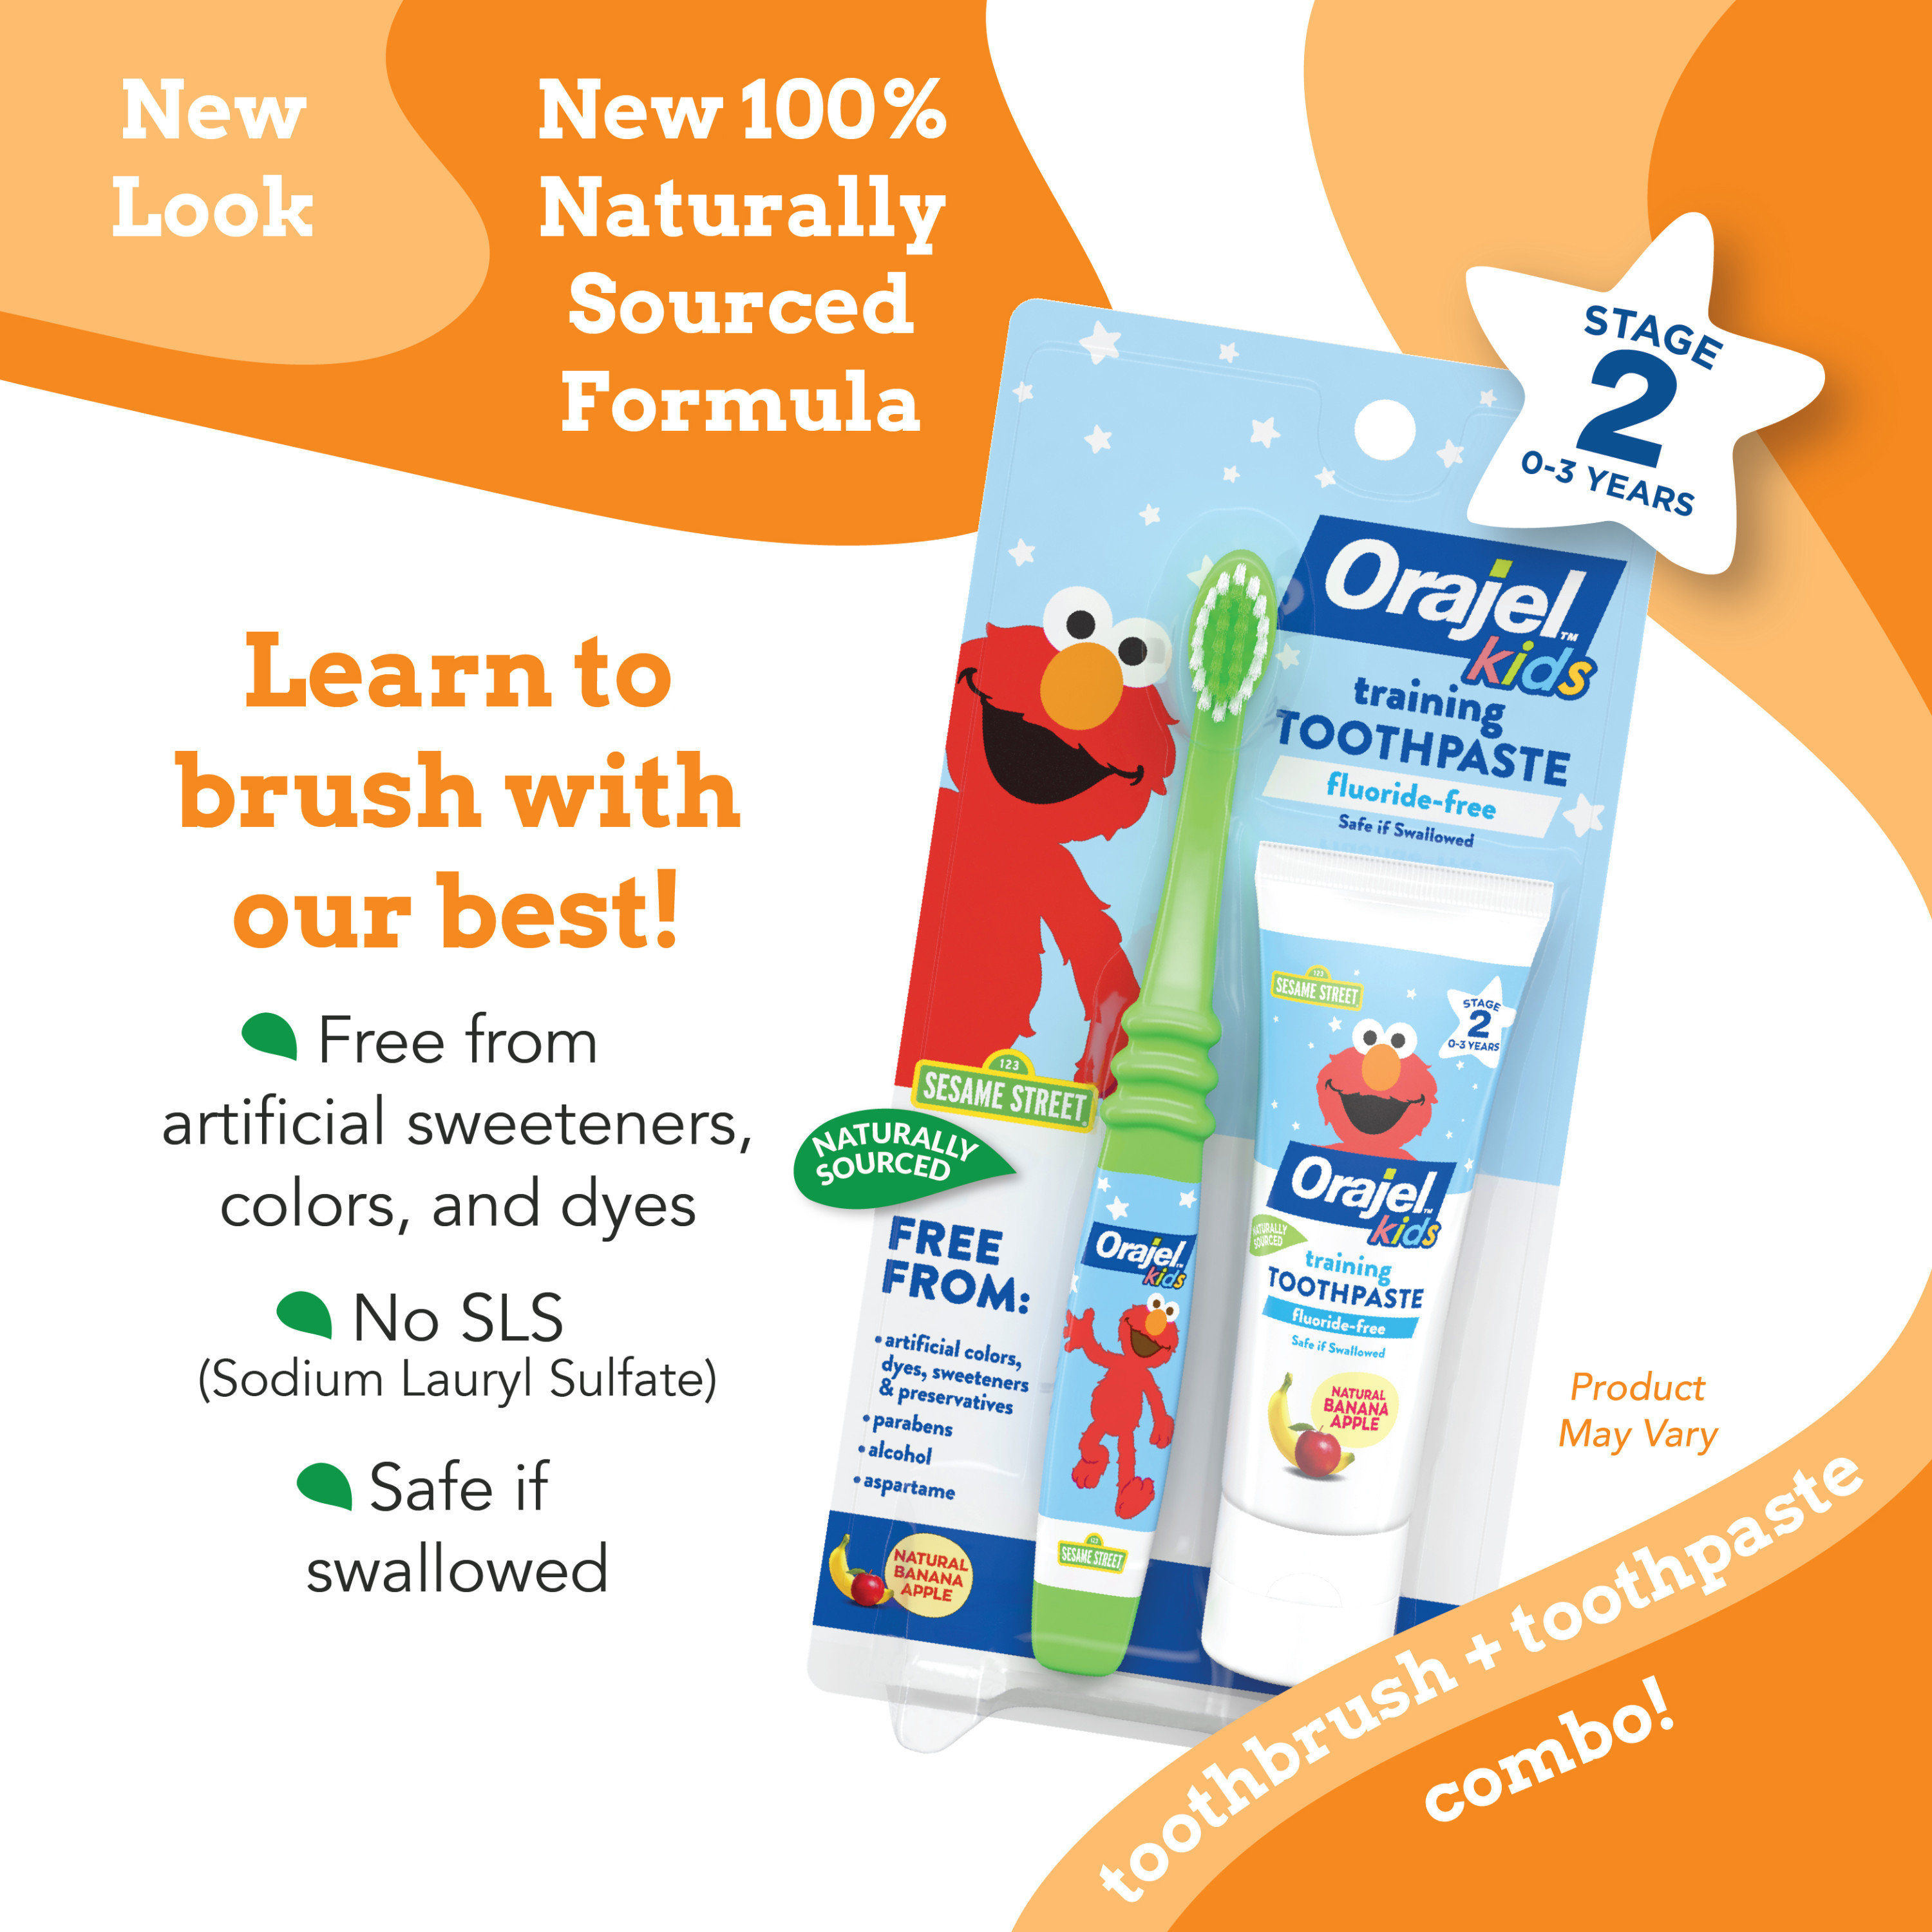 Orajel Kids Elmo Training Toothpaste for Infant and Toddlers, Fluoride-Free, 1 Toothbrush, 1 oz Toothpaste - image 3 of 7